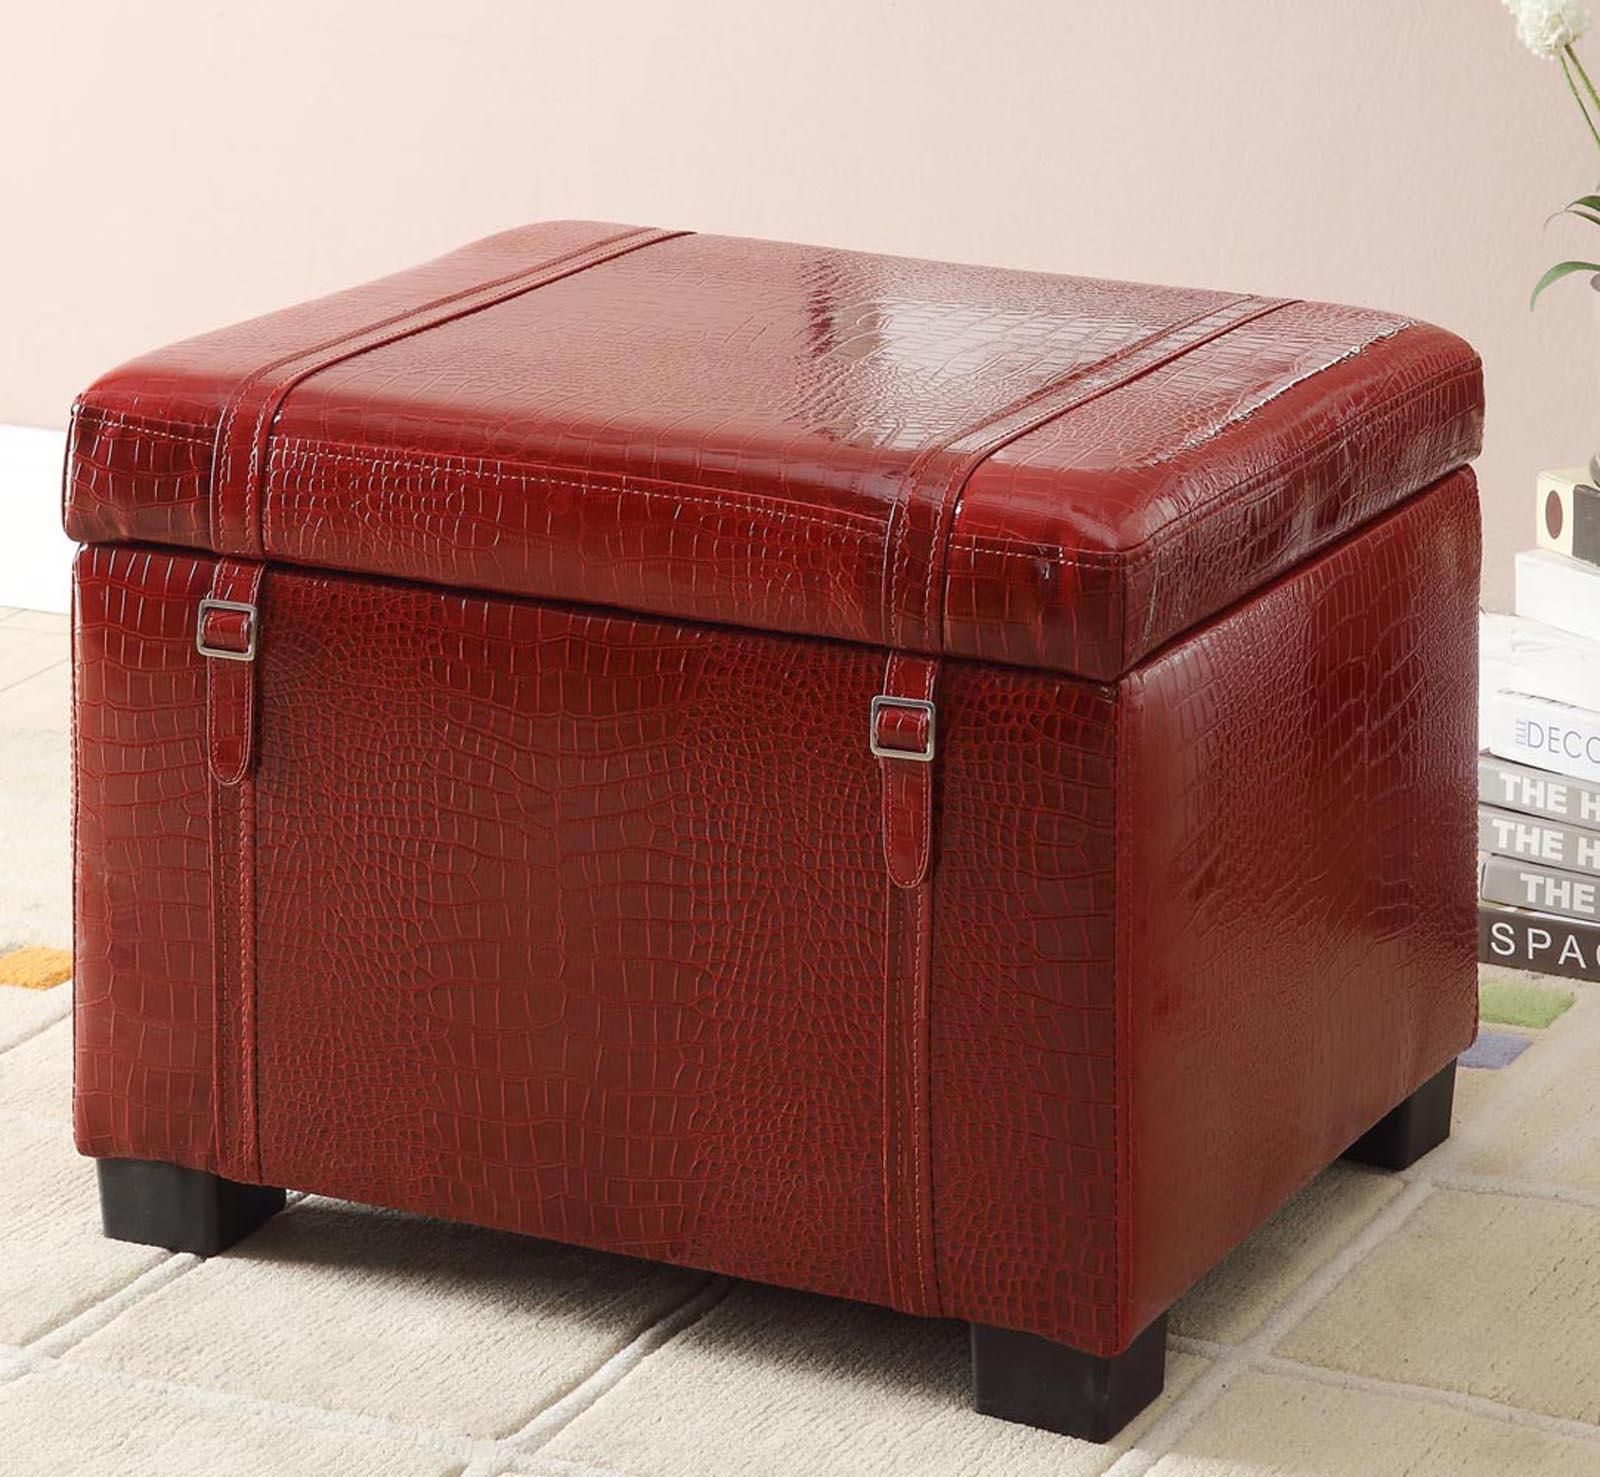 Faux Leather Storage Ottoman In Red Crocodile – Walmart – Walmart Pertaining To Leather Pouf Ottomans (View 20 of 20)